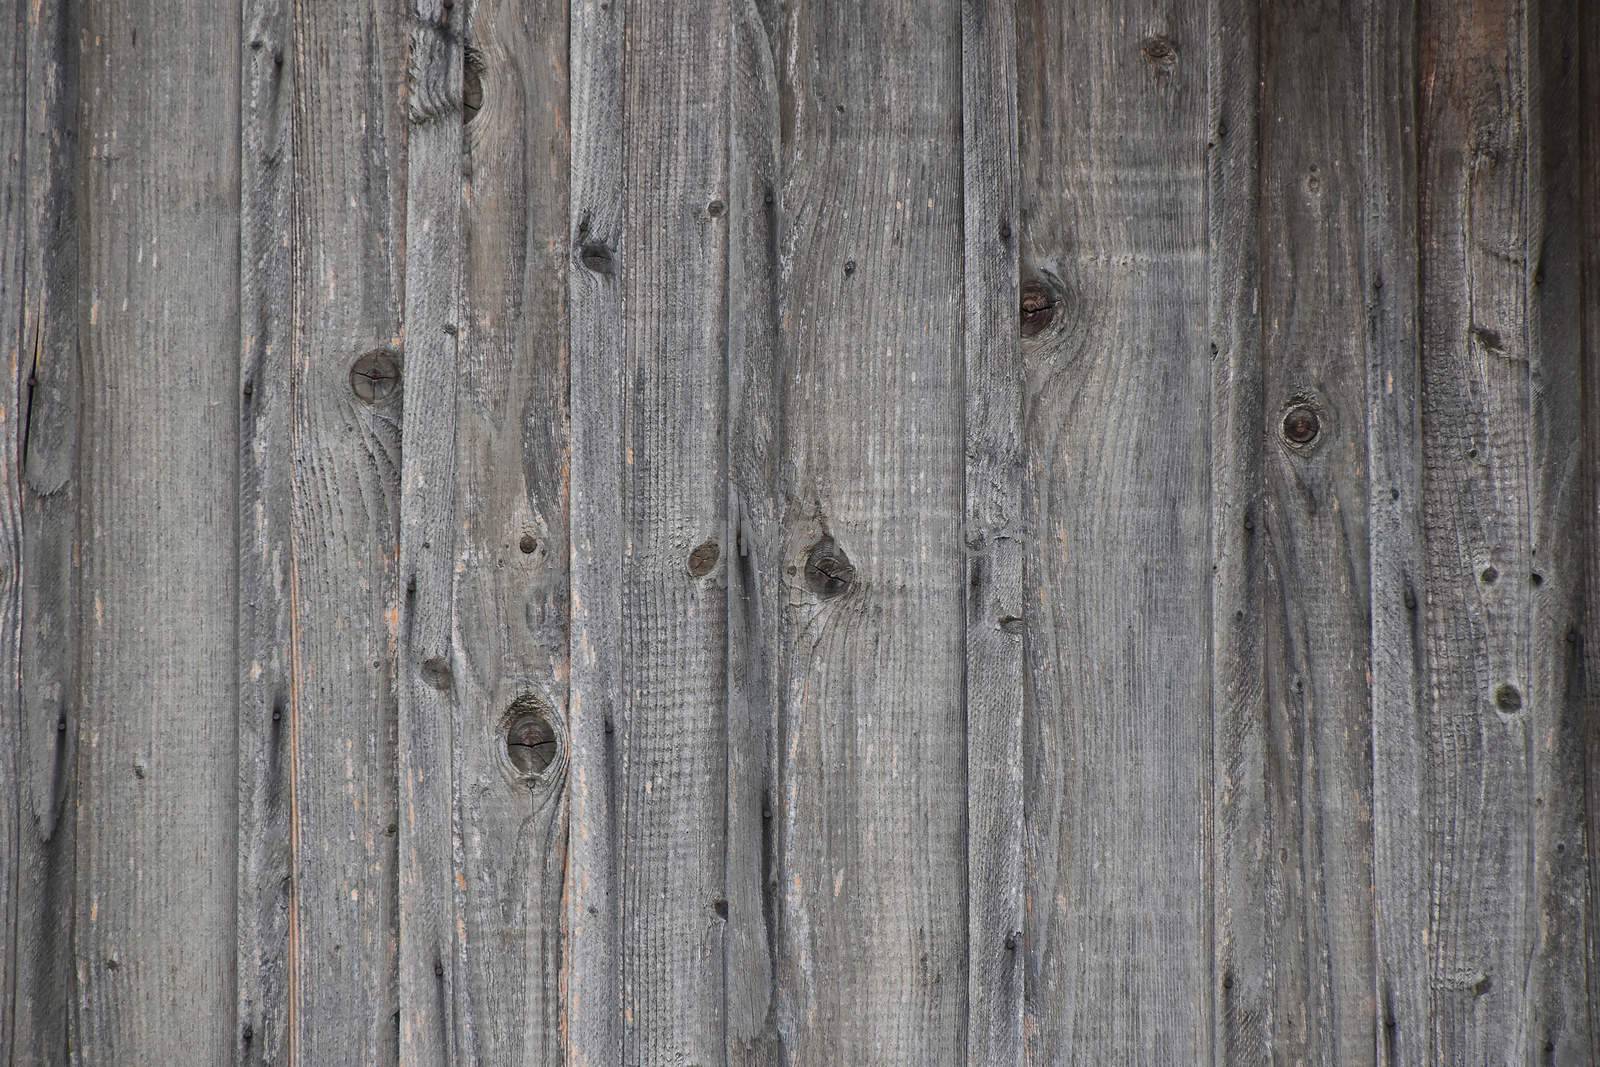 Old dark vintage rustic aged antique wooden sepia fence panel with vertical gaps, planks and chinks